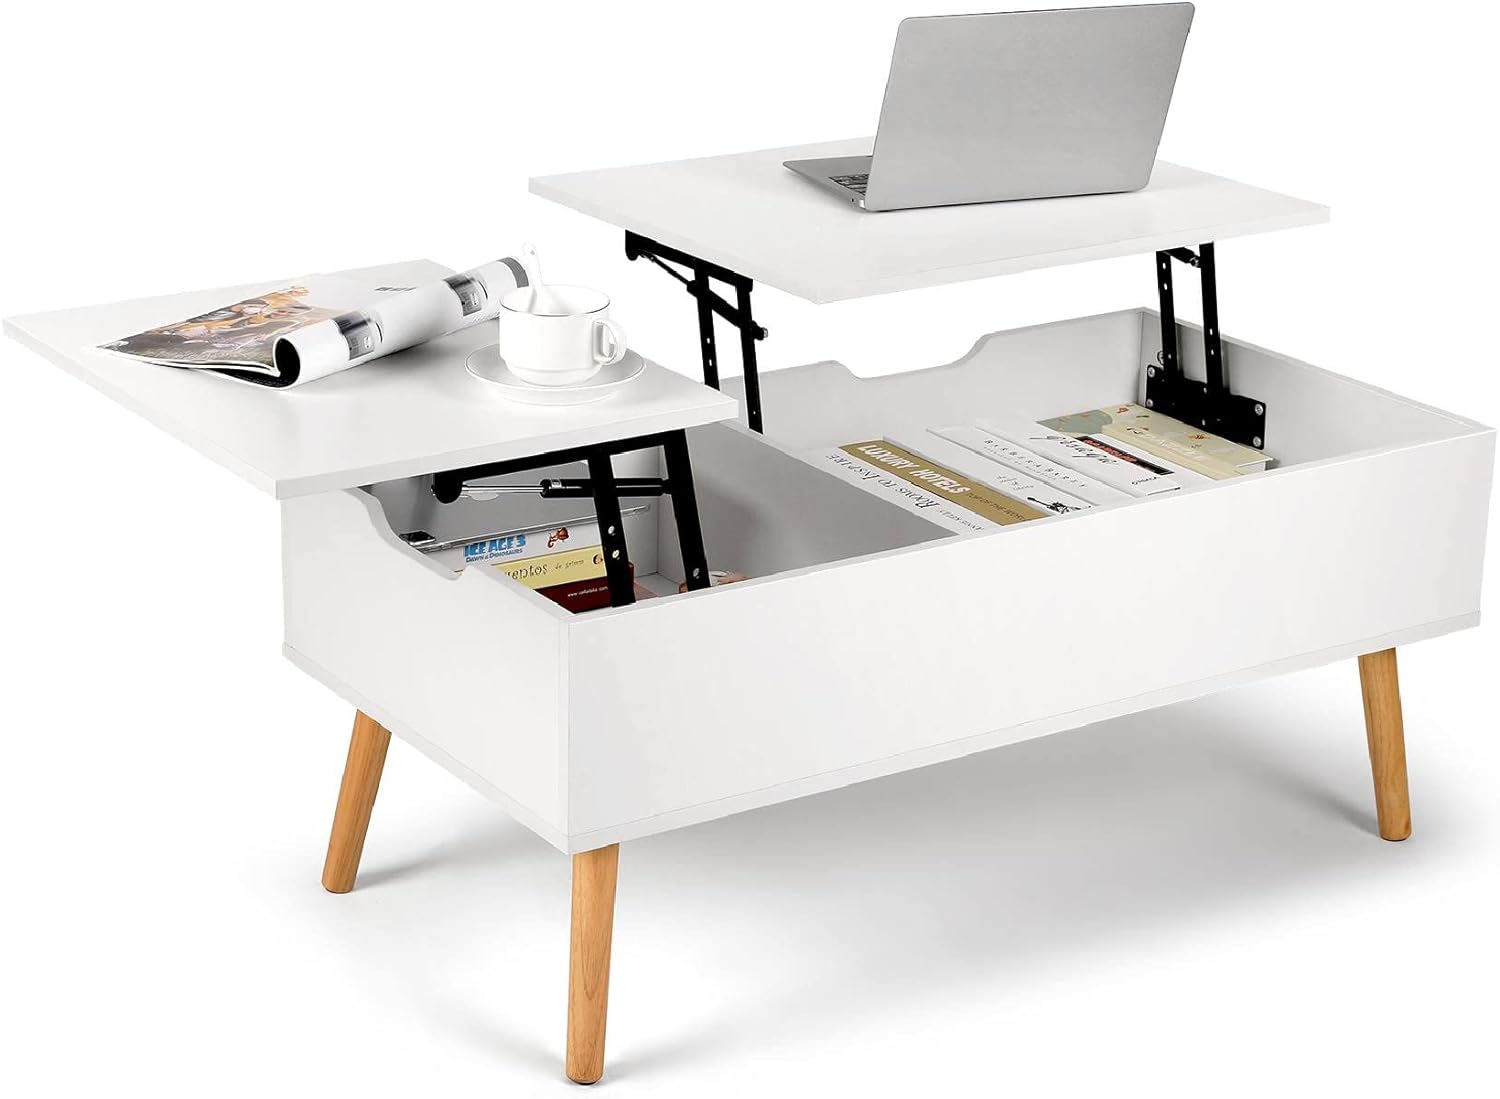 VOWNER Coffee Table, Lift Top Coffee Table with Separate and Hidden Storage Compartment, Double Lift Tabletop, Sofa Table for Home Living Room, White